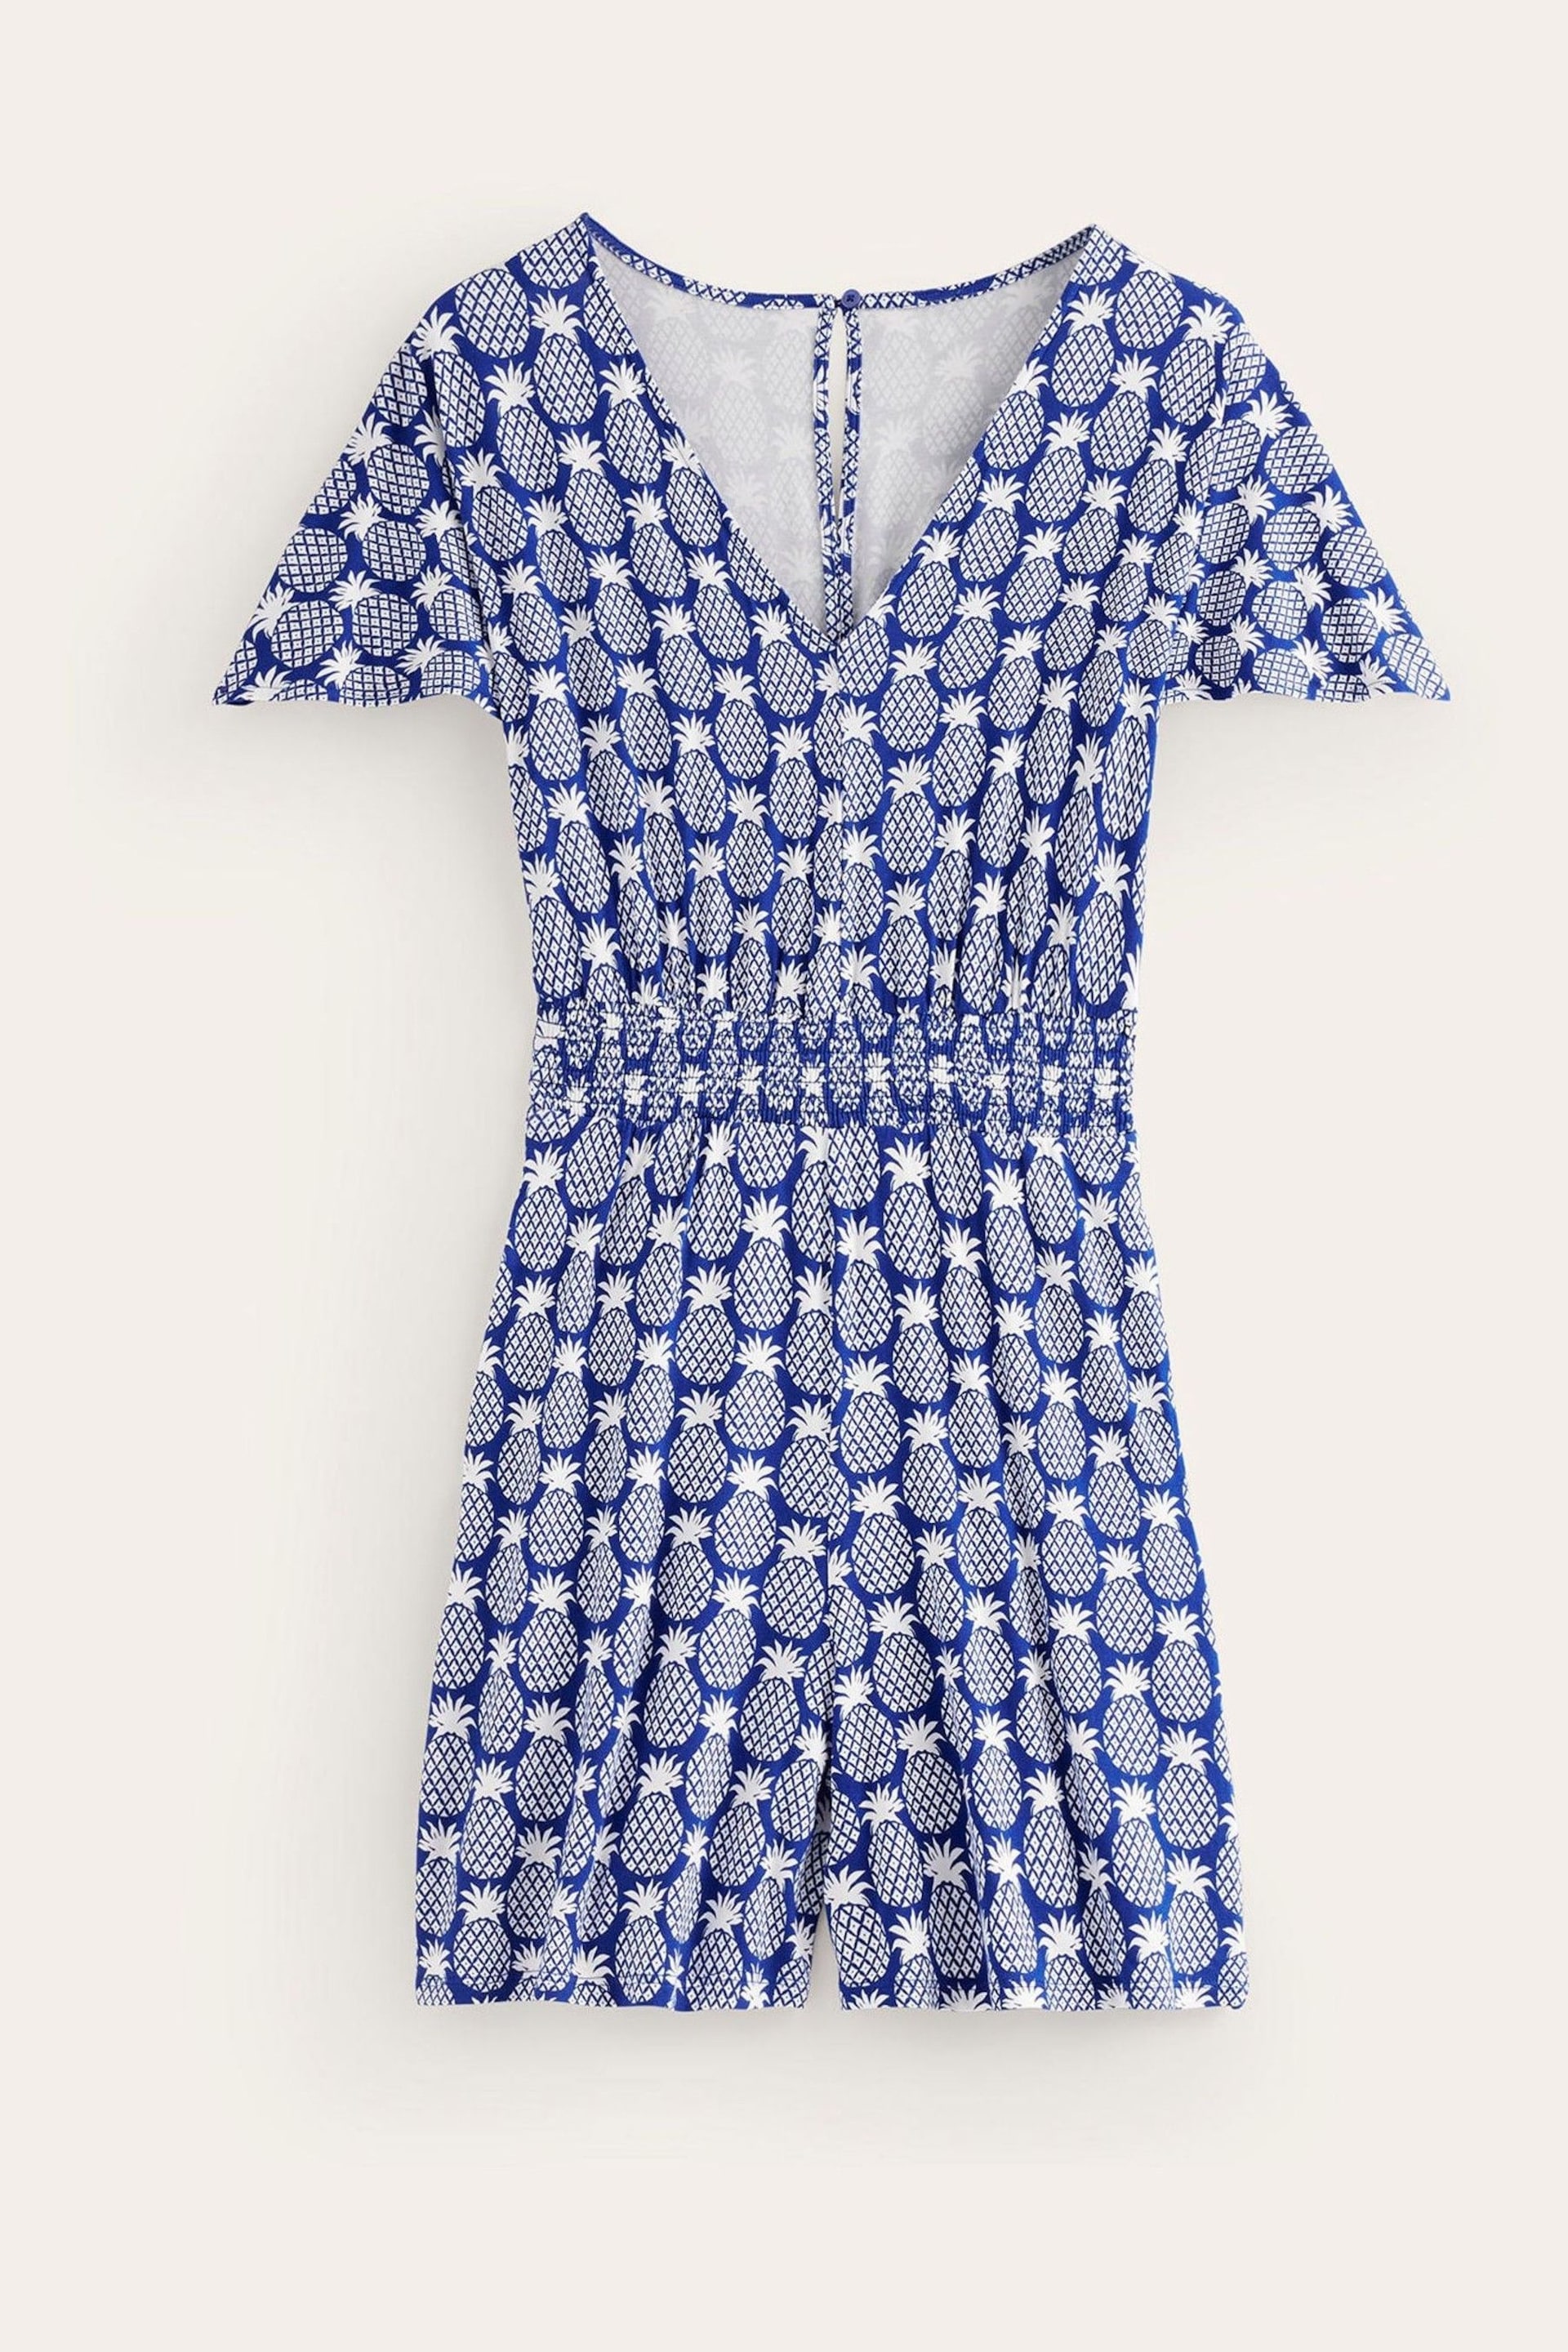 Boden Blue Smocked Jersey Pineapple Playsuit - Image 5 of 5